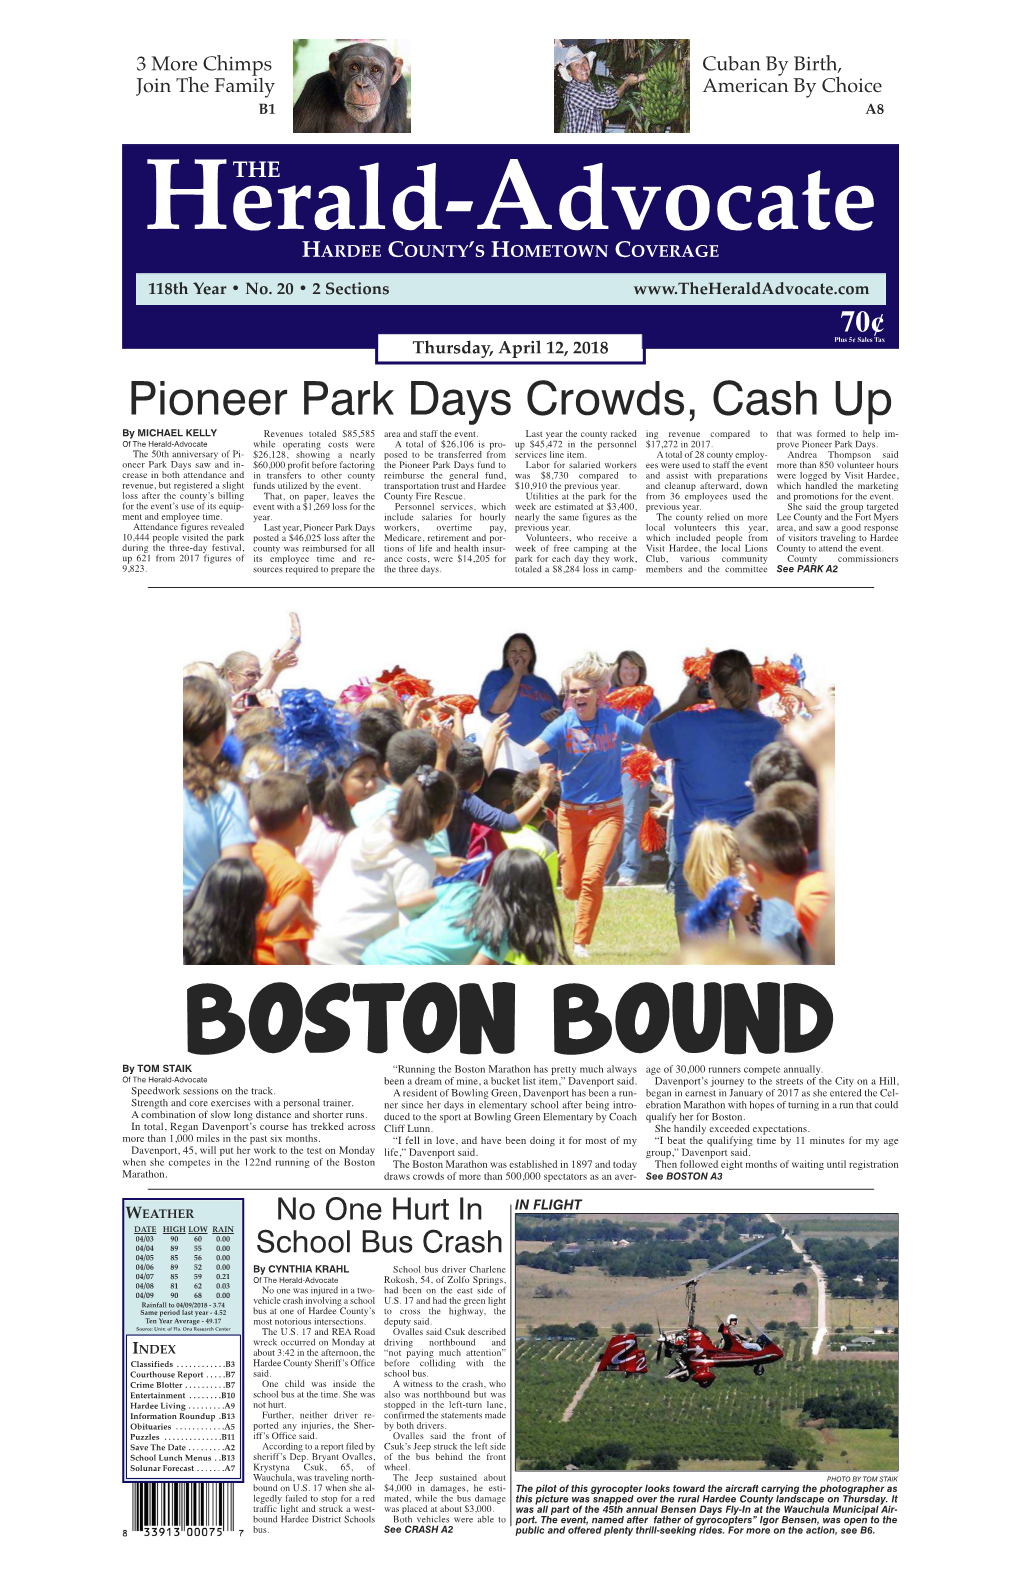 Pioneer Park Days Crowds, Cash up by MICHAEL KELLY Revenues Totaled $85,585 Area and Staff the Event